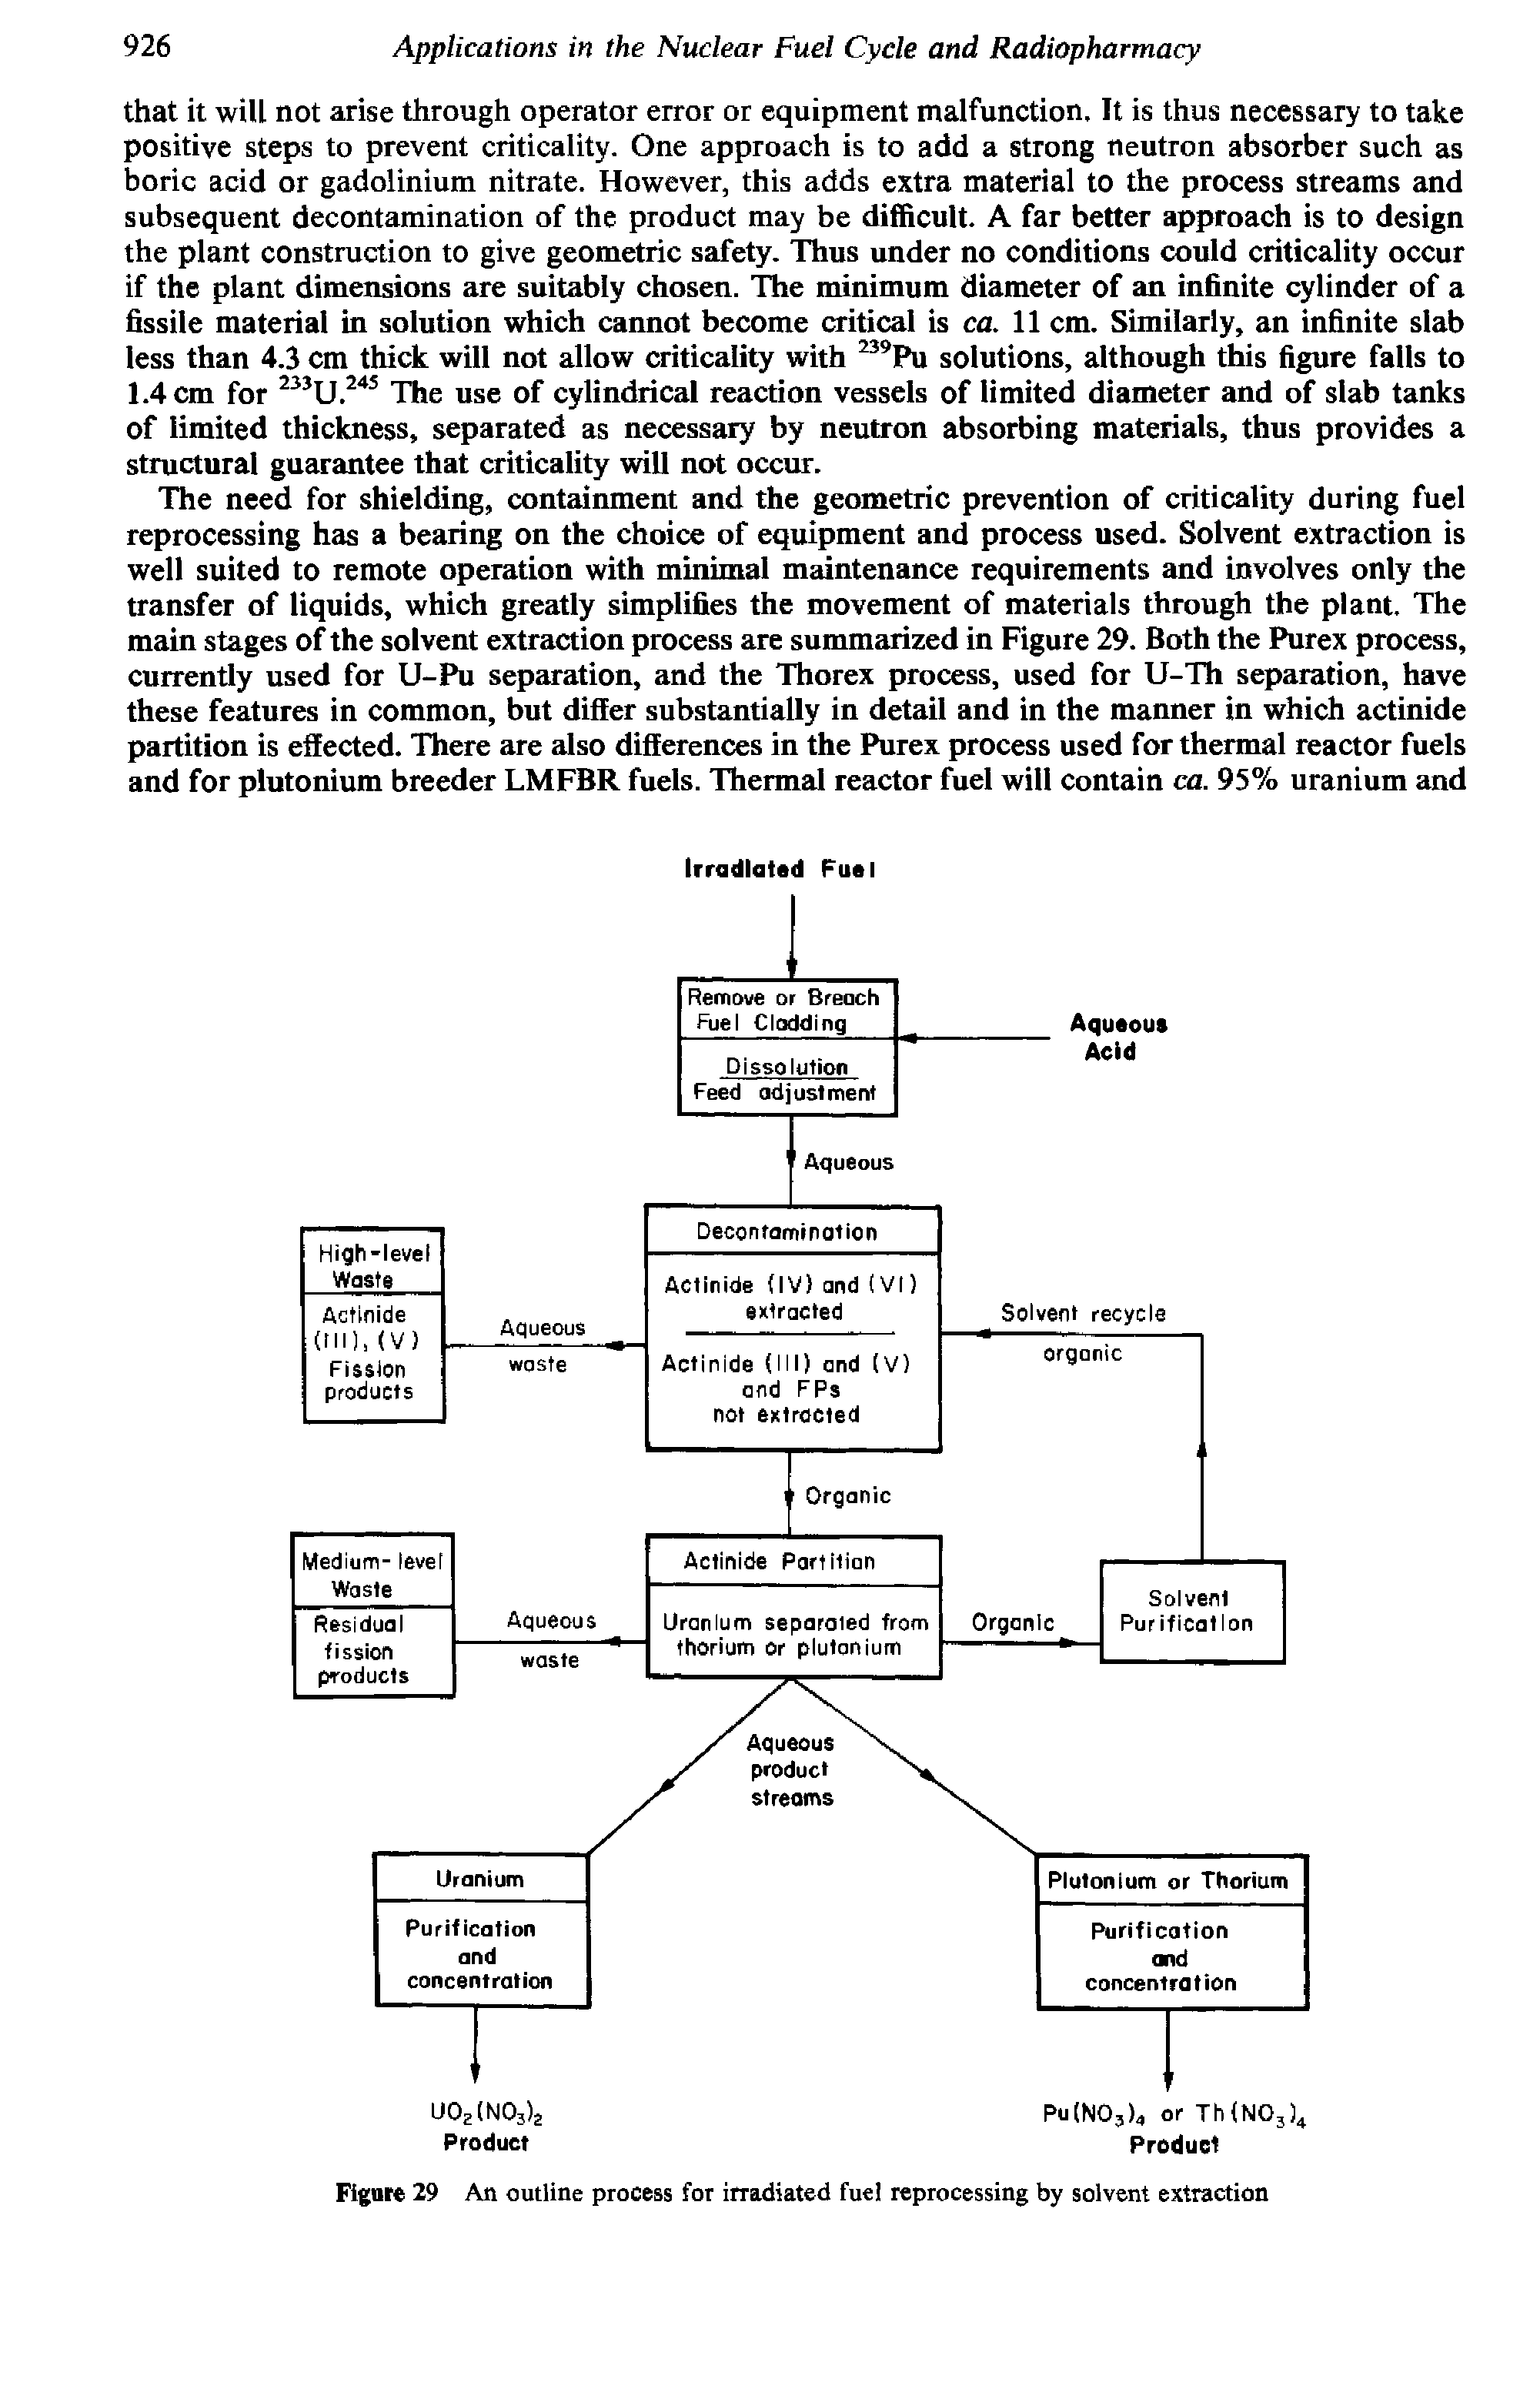 Figure 29 An outline process for irradiated fuel reprocessing by solvent extraction...